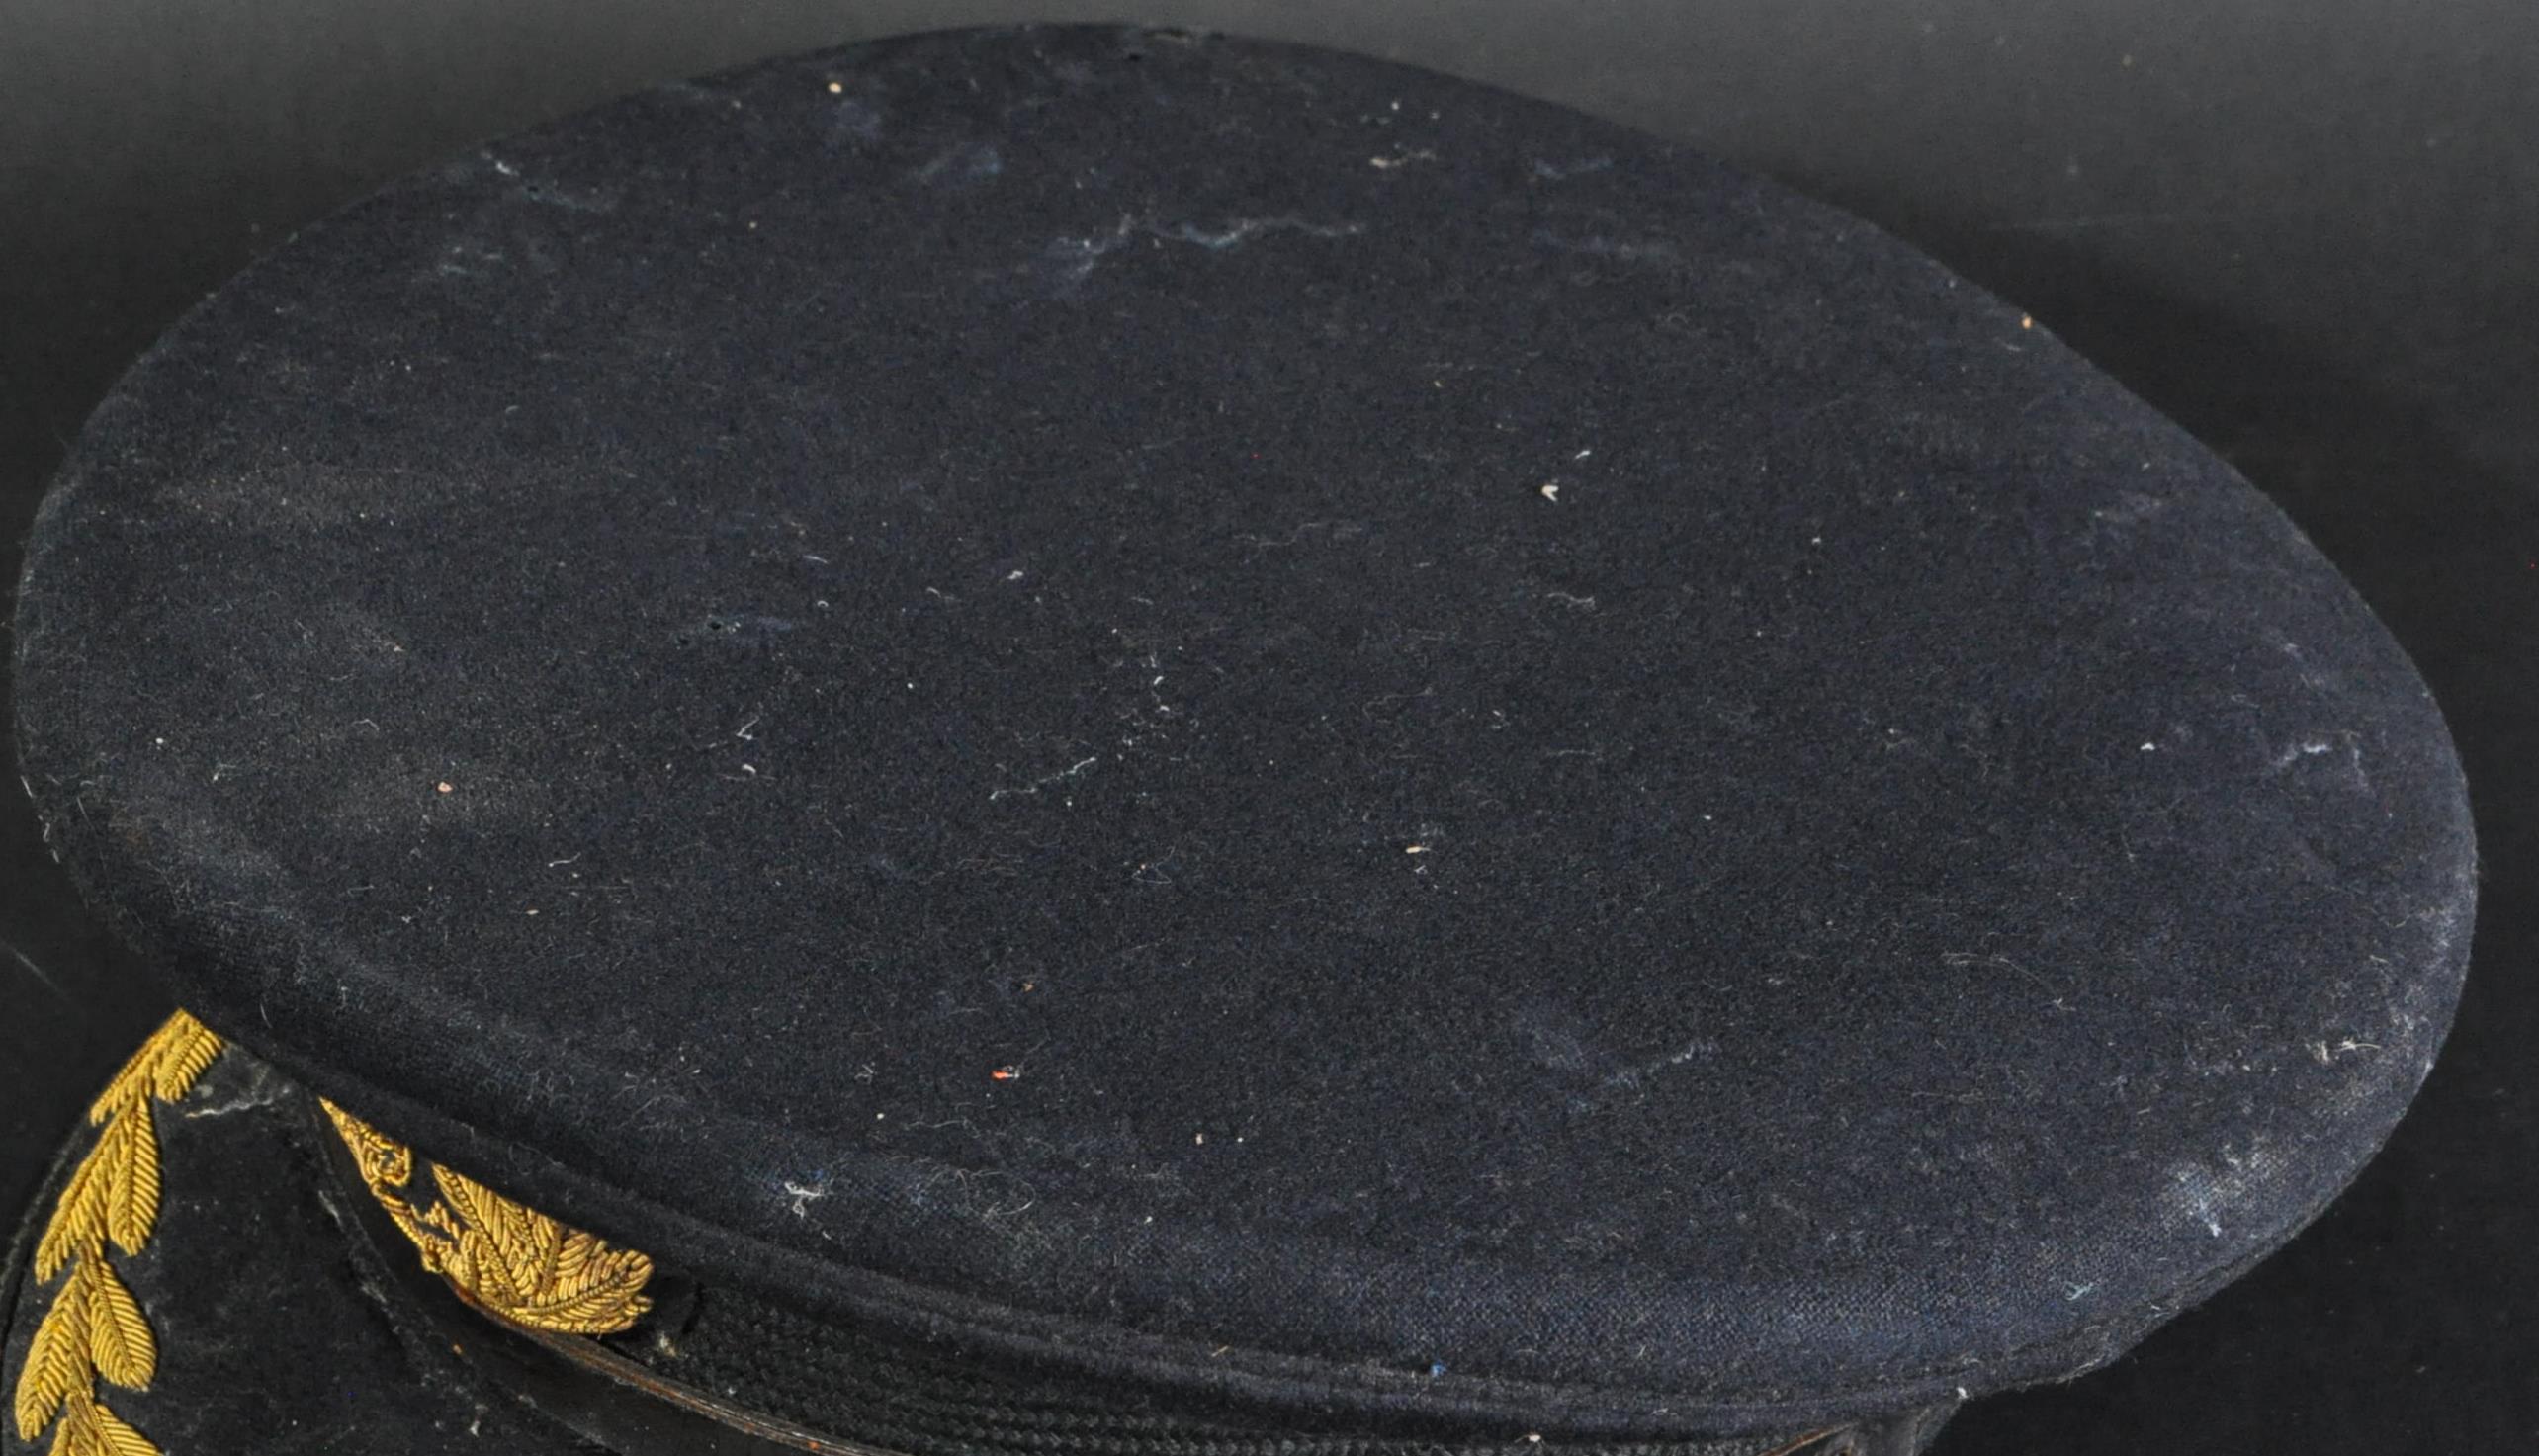 WWII INTEREST - 20TH CENTURY BRITISH ROYAL NAVY OFFICER'S CAP - Image 3 of 4